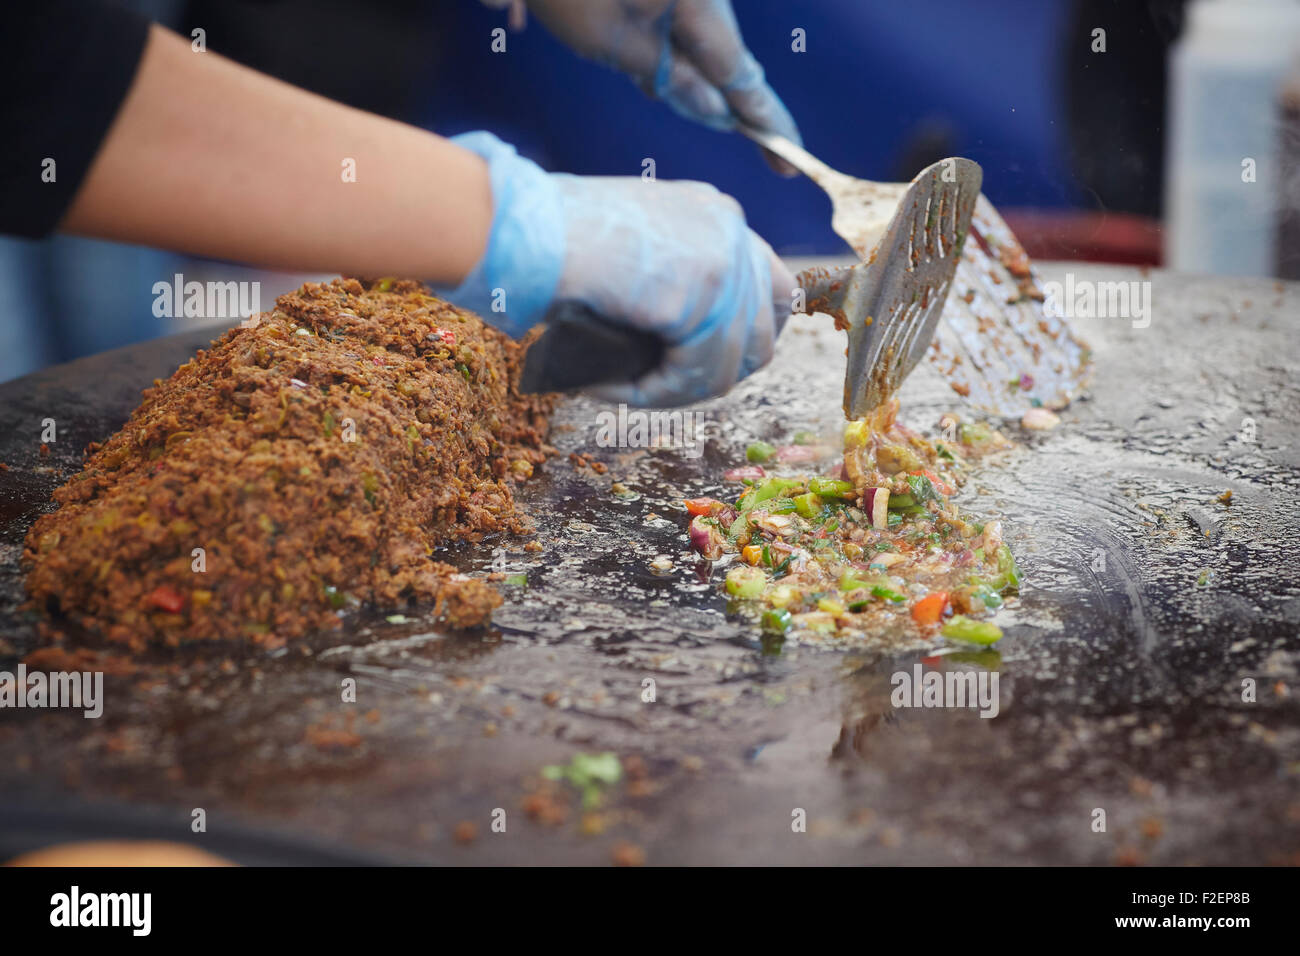 Mixing street food curry at artisan food market festival cooking Stock Photo